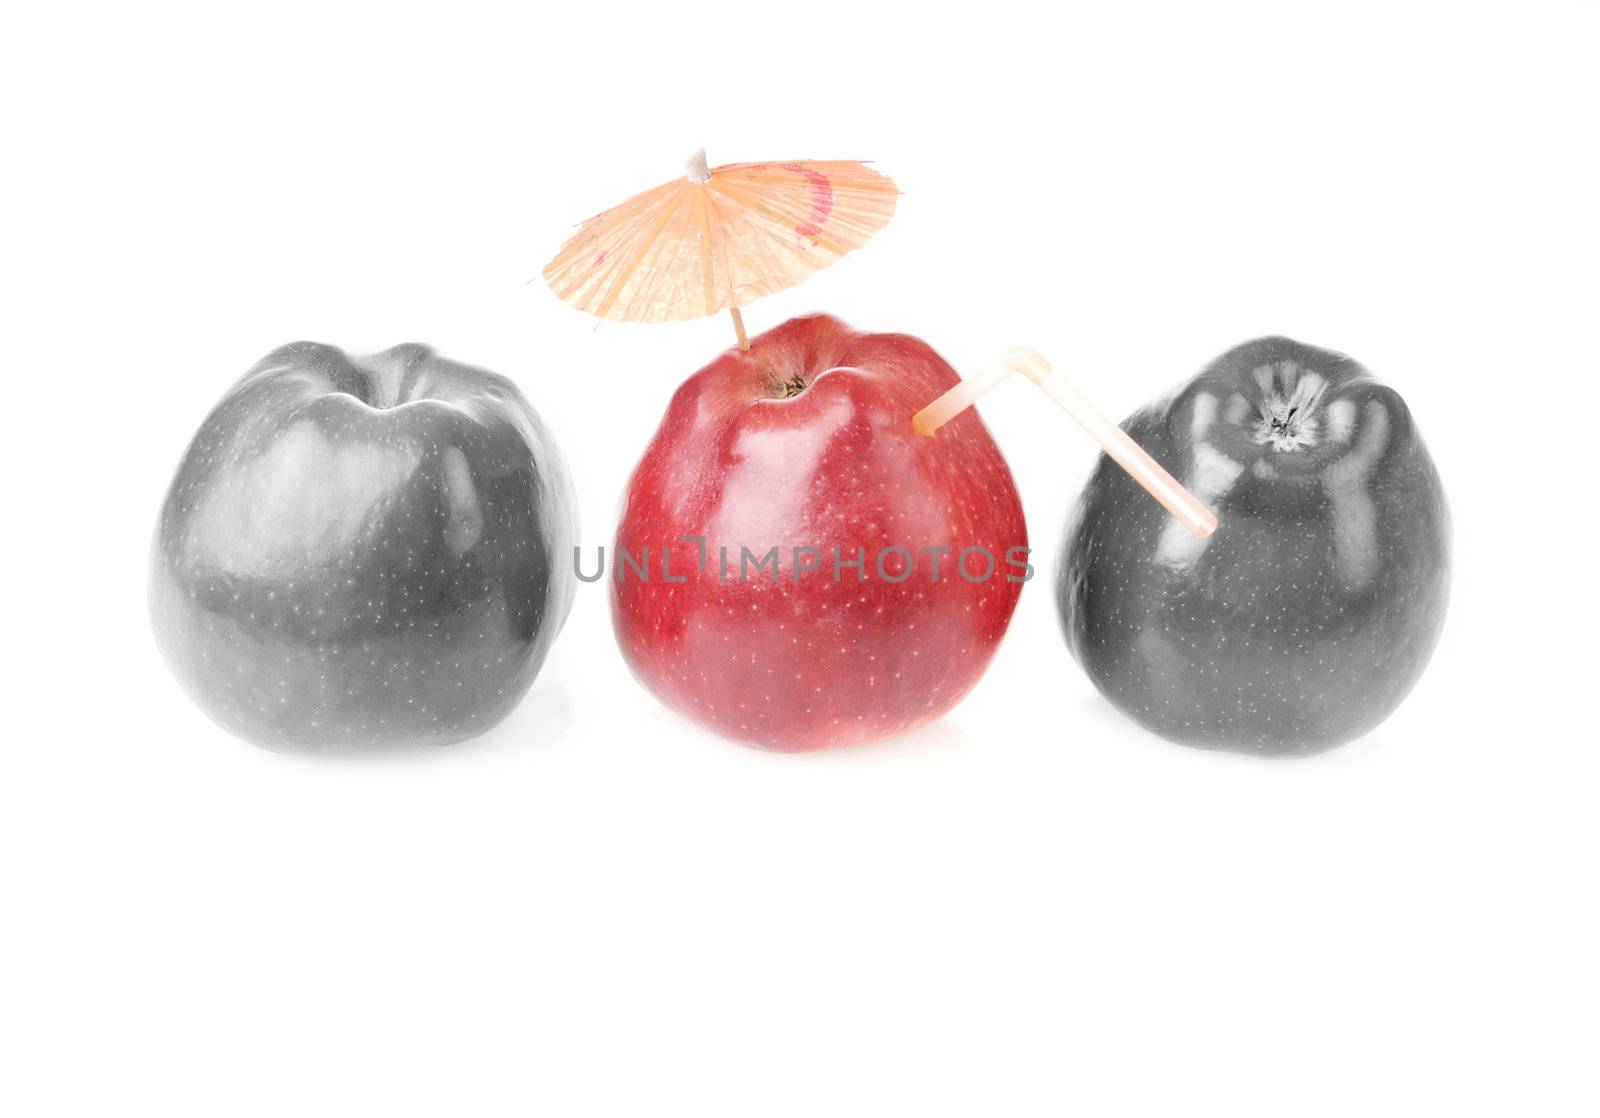 One red apples and two colourless apples by iryna_rasko